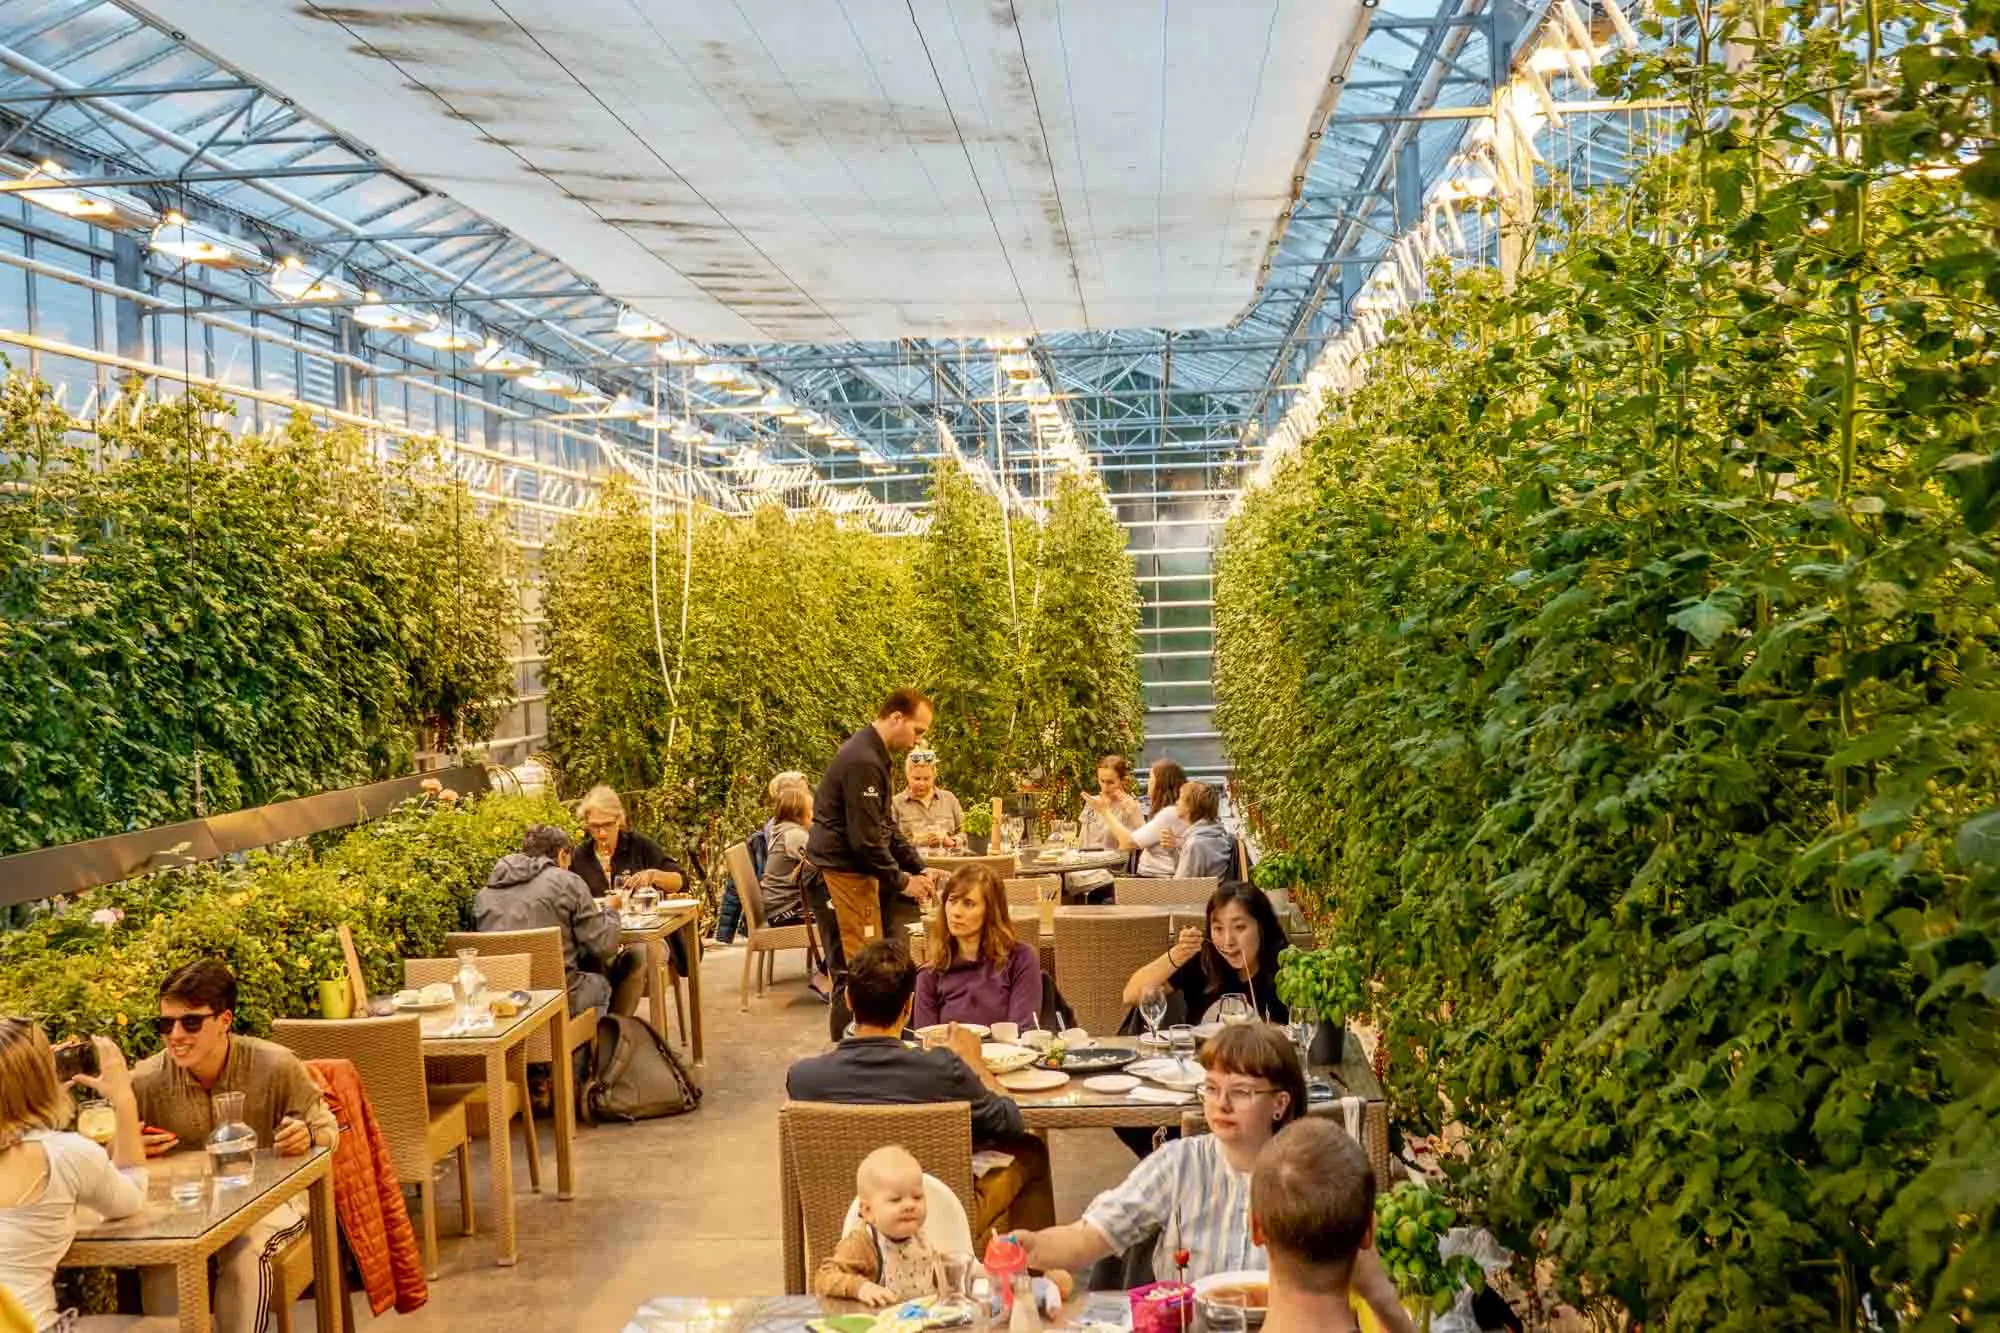 People eating in Fridheimer tomato greenhouse restaurant in Iceland